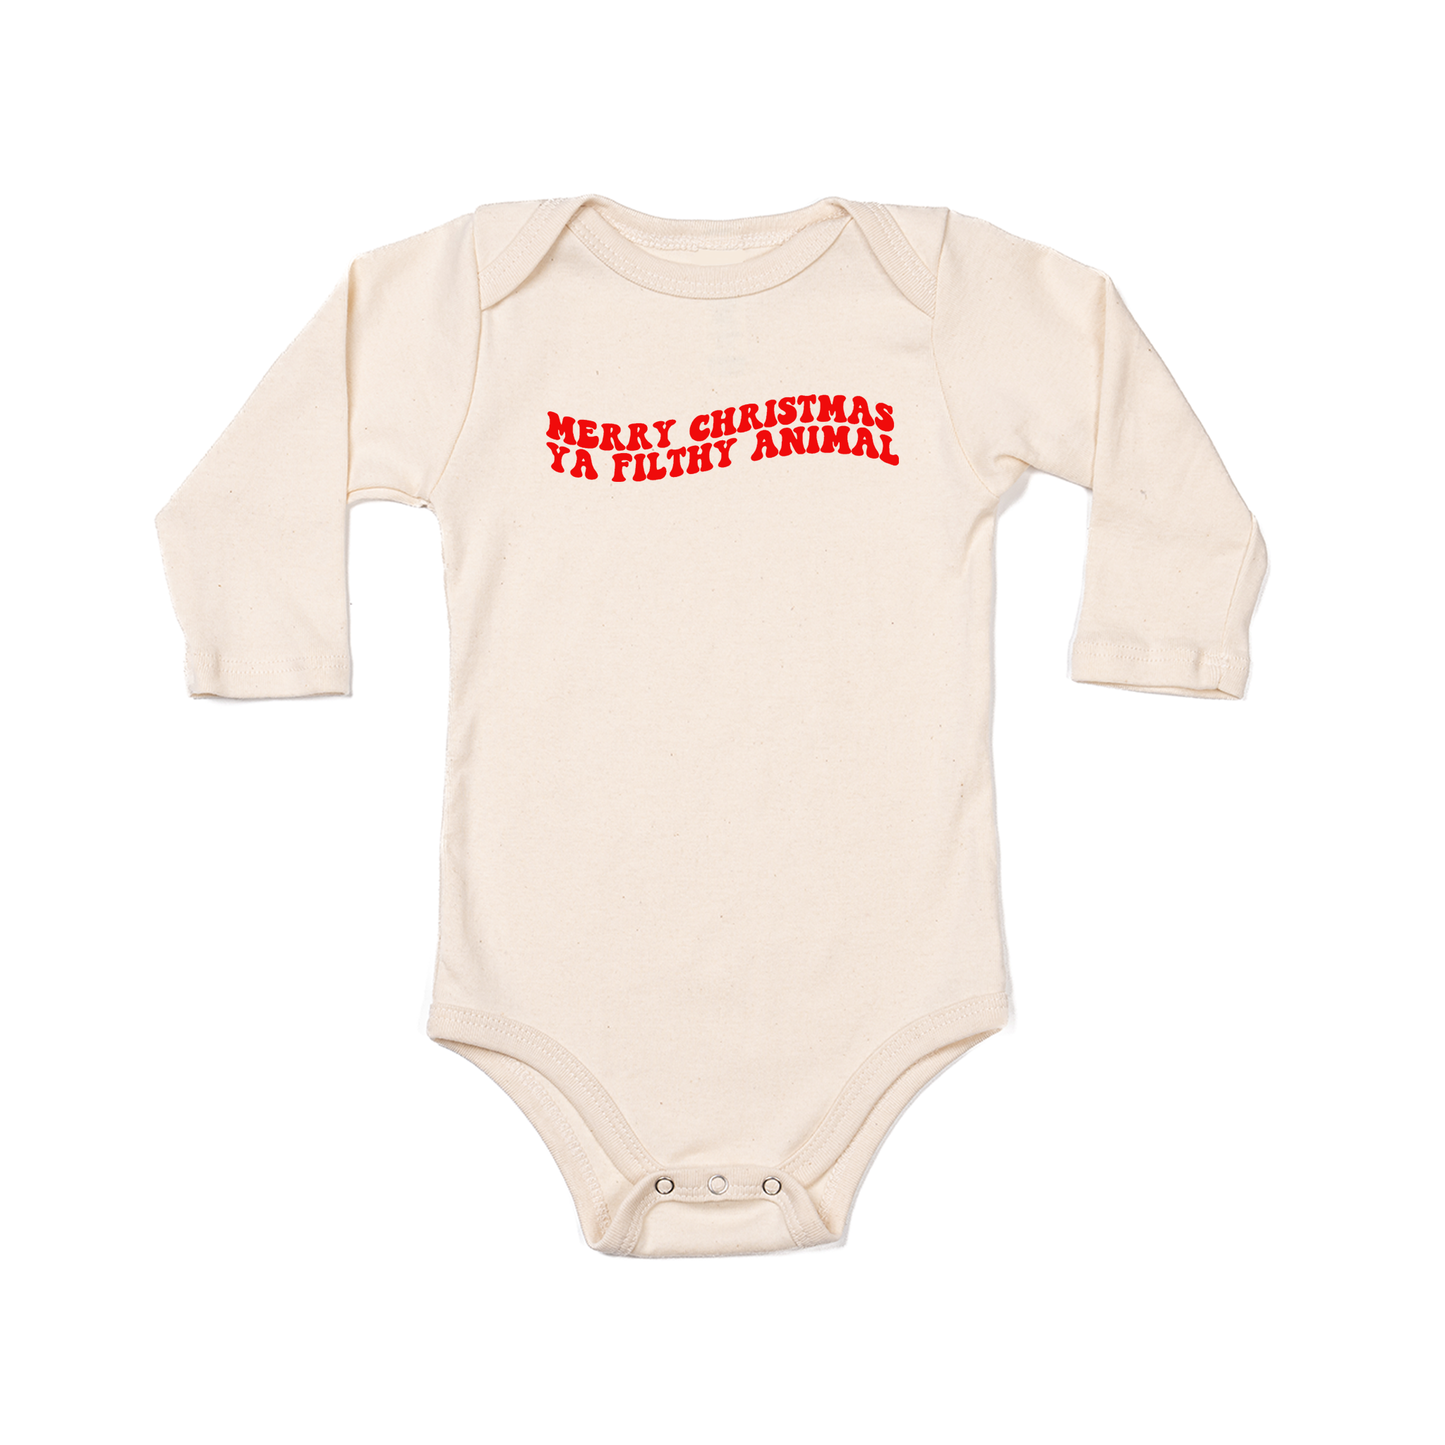 Merry Christmas Ya Filthy Animal (Version 2, Red) - Bodysuit (Natural, Long Sleeve)